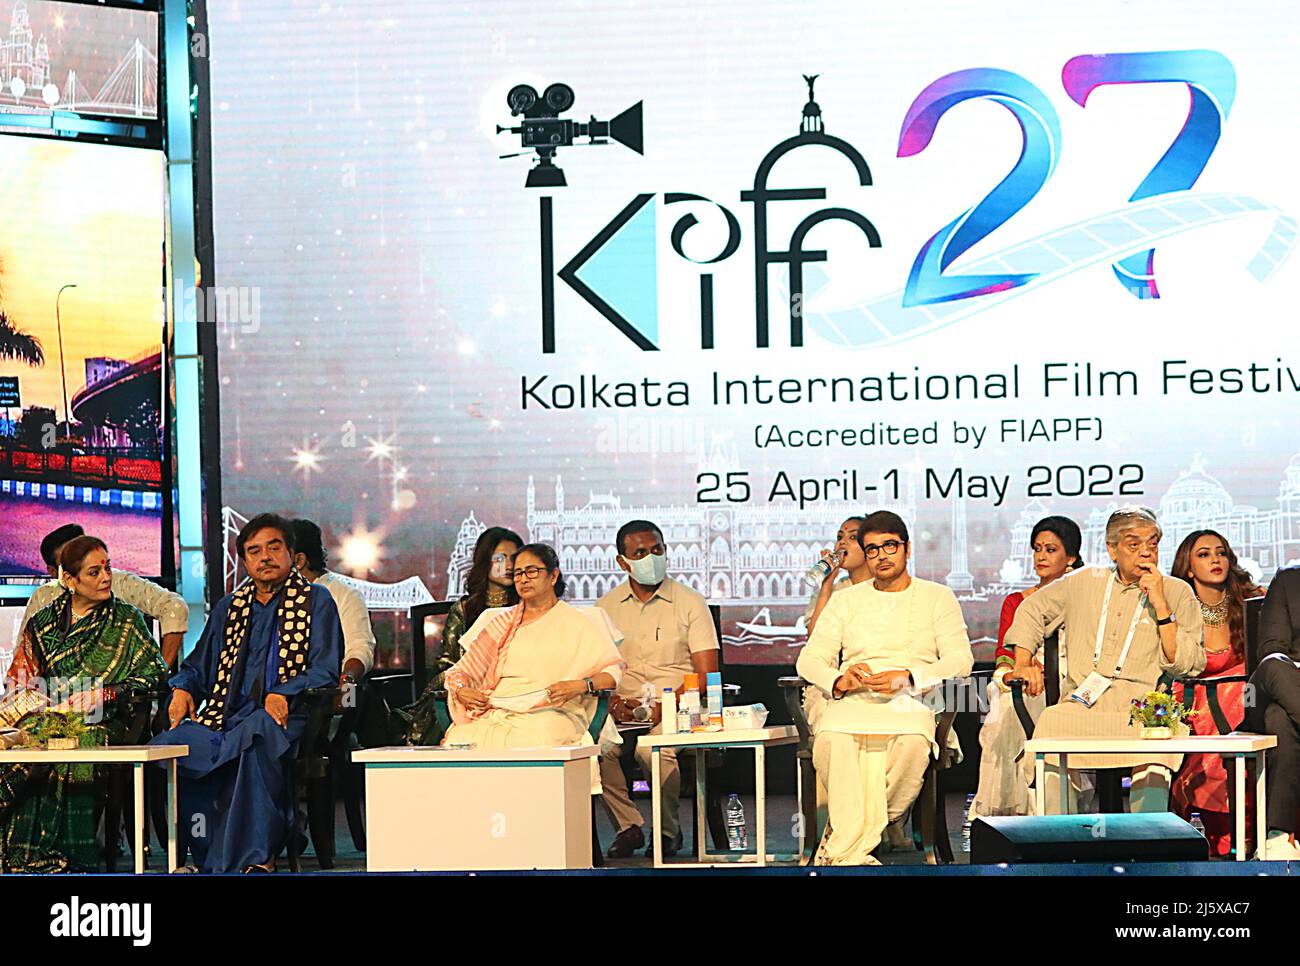 in Kolkata, India. , . The festival will also offer a centenary tribute to Hungarian filmmaker Miklos Jancso and filmmaker and critic Chidananda Dasgupta. Finland is the focus country this year and about half-a-dozen films including Tove by Zaida Bergroth and The Other Side Of Hope by Aki Kaurismak will be screened. Actor-turned-politician Shatrughan Sinha, who was the chief guest at the inauguration, said he would remain a fan of Satyajit Ray and Raj Kapoor all his life. Mr. Sinha recounted his association with legends lik Credit: Pacific Press Media Production Corp./Alamy Live News Stock Photo